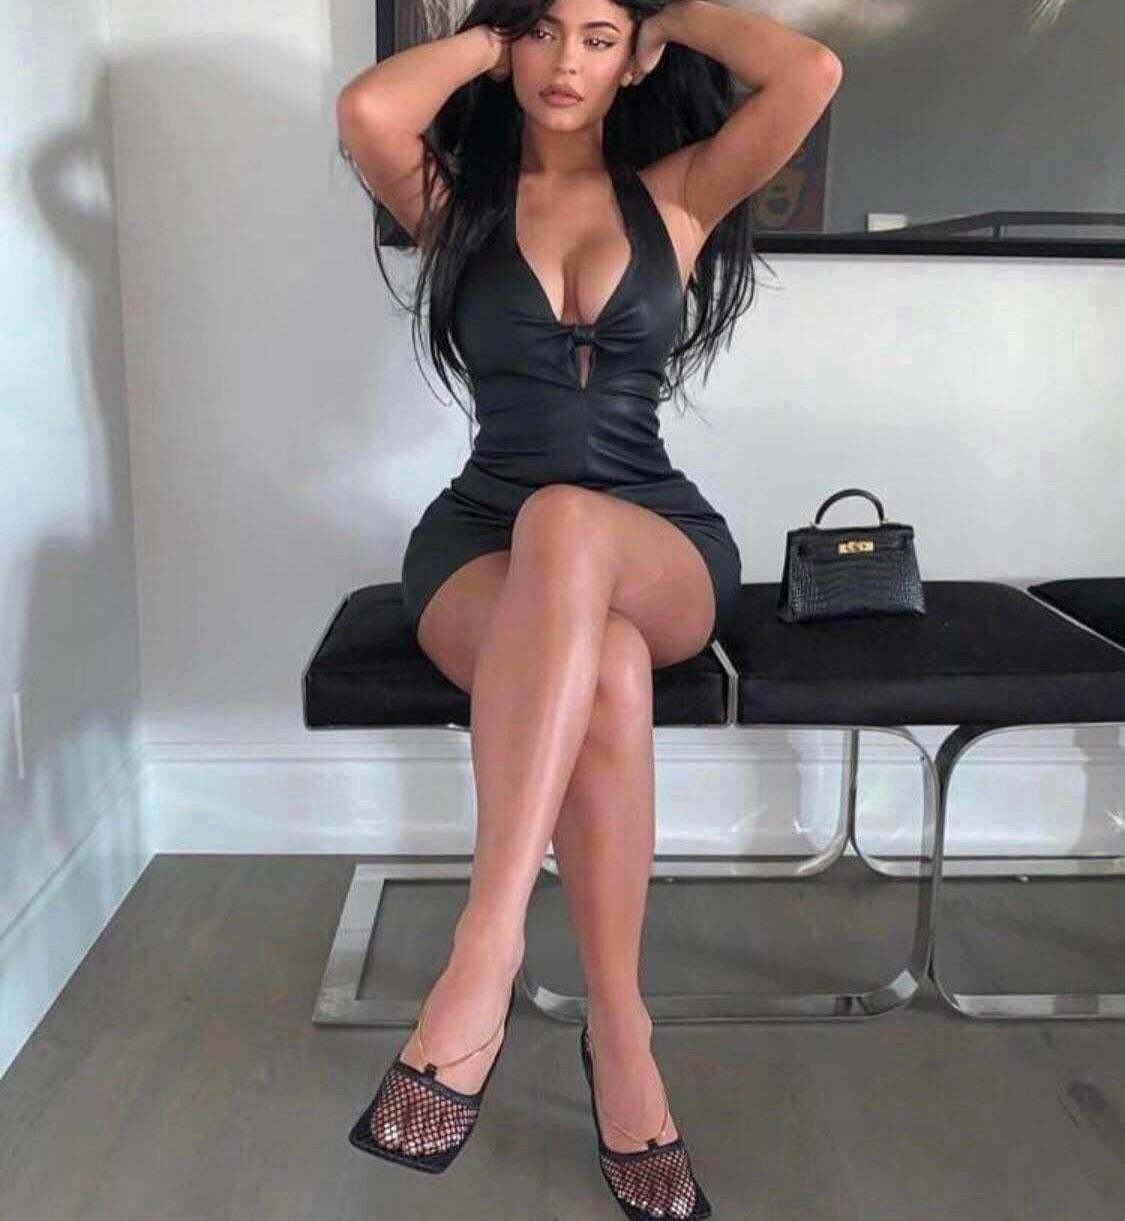 Lets get bi and cum over Kylie Jenner and her